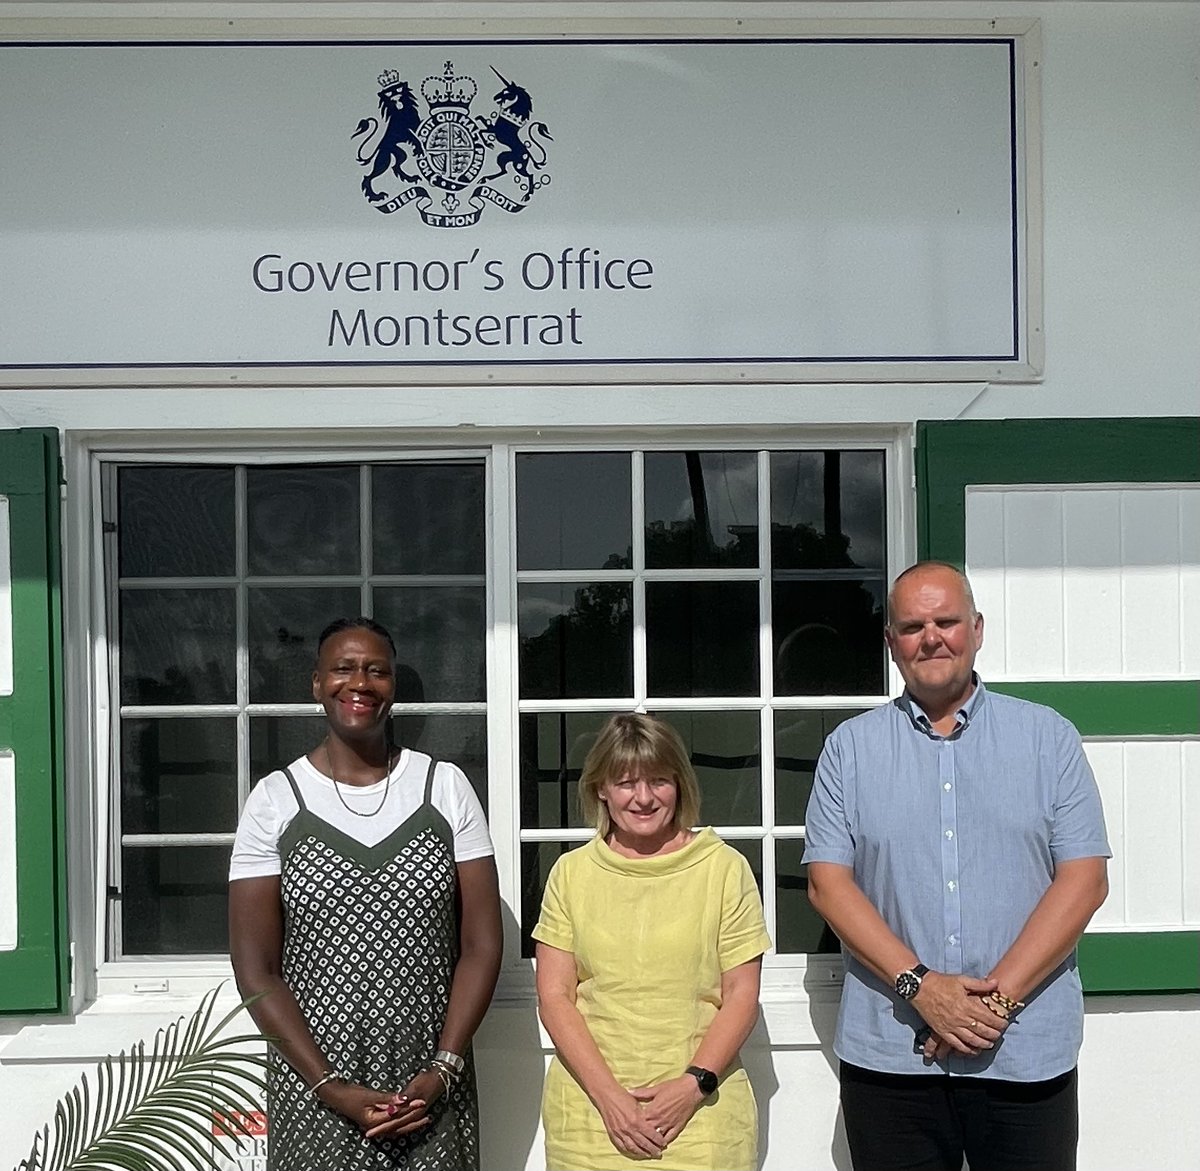 A warm welcome to Helen Robinson, our new Events and Residence manager, and to Phil Hickson who joined us as Governor's Office Policy lead.

#Montserrat #newstarters @SarahGeorgina68